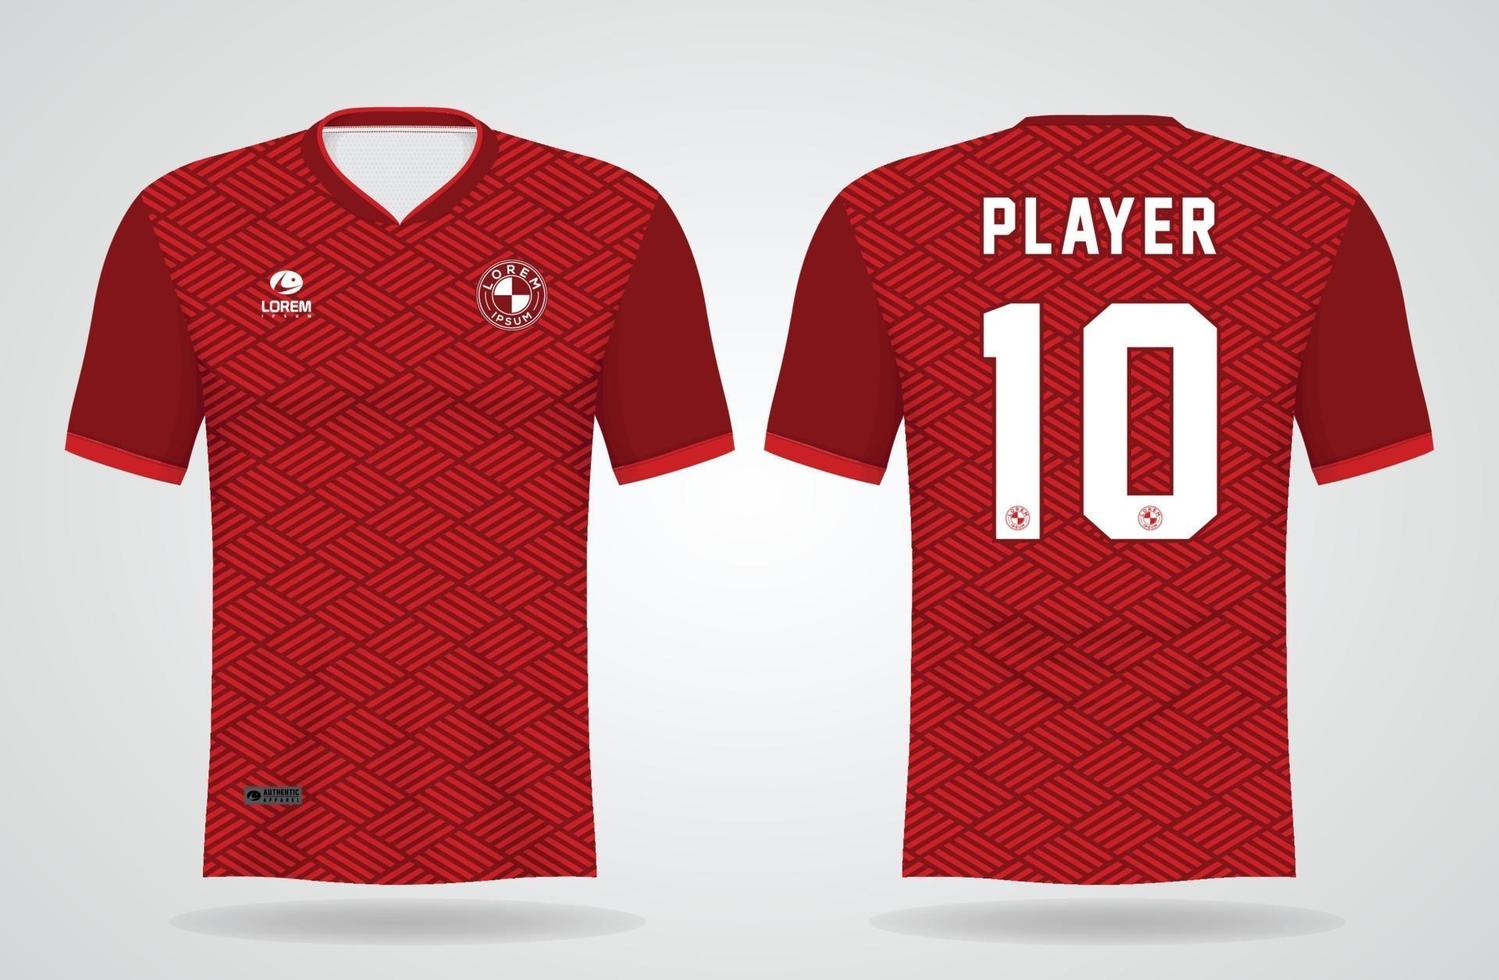 red sports jersey template for team uniforms and Soccer t shirt design vector